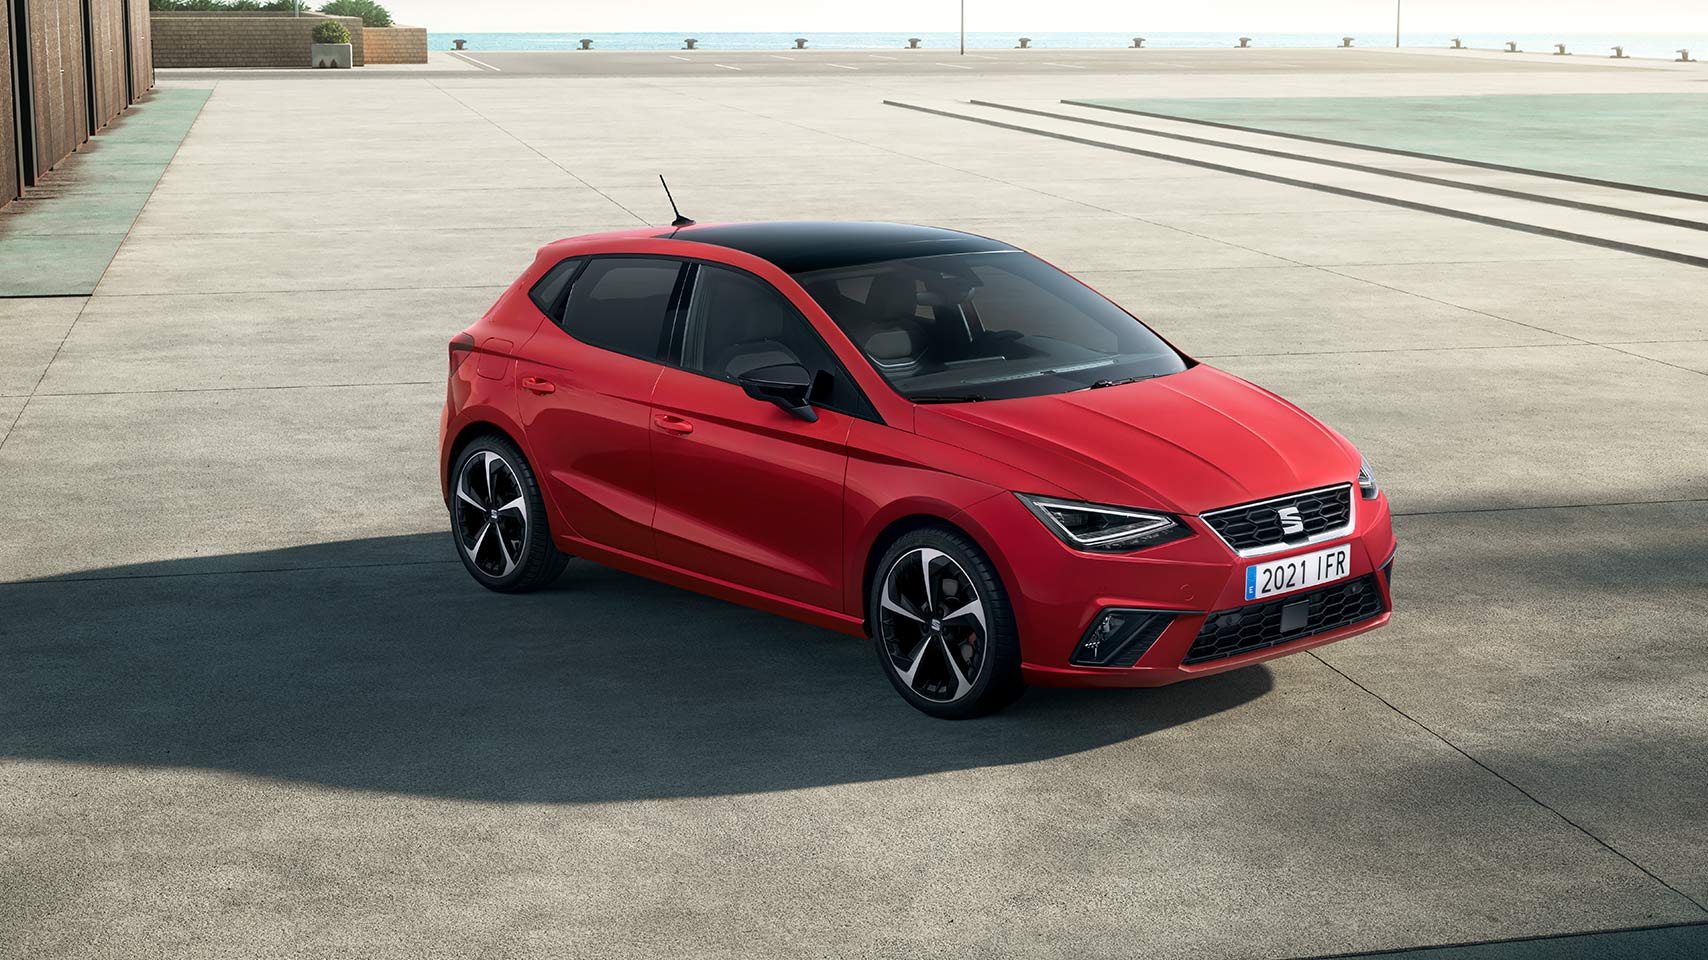 overeenkomst vice versa directory New SEAT Ibiza 2021 - Details Announced | SEAT